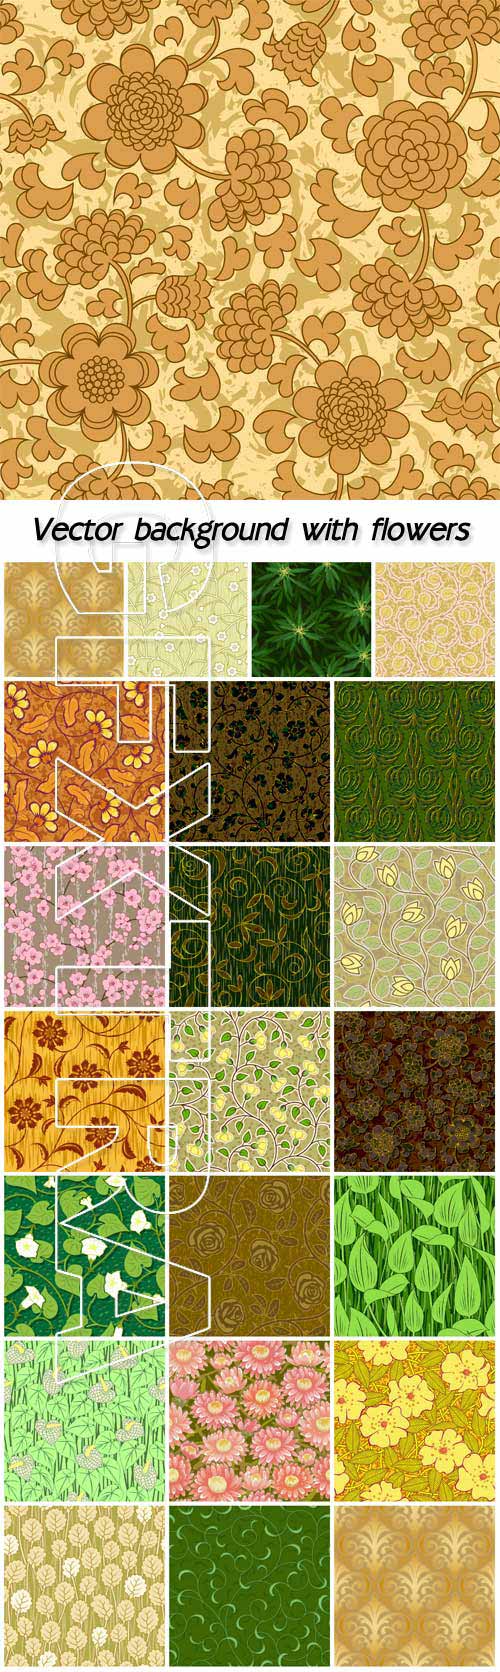 Vector background with flowers and various patterns